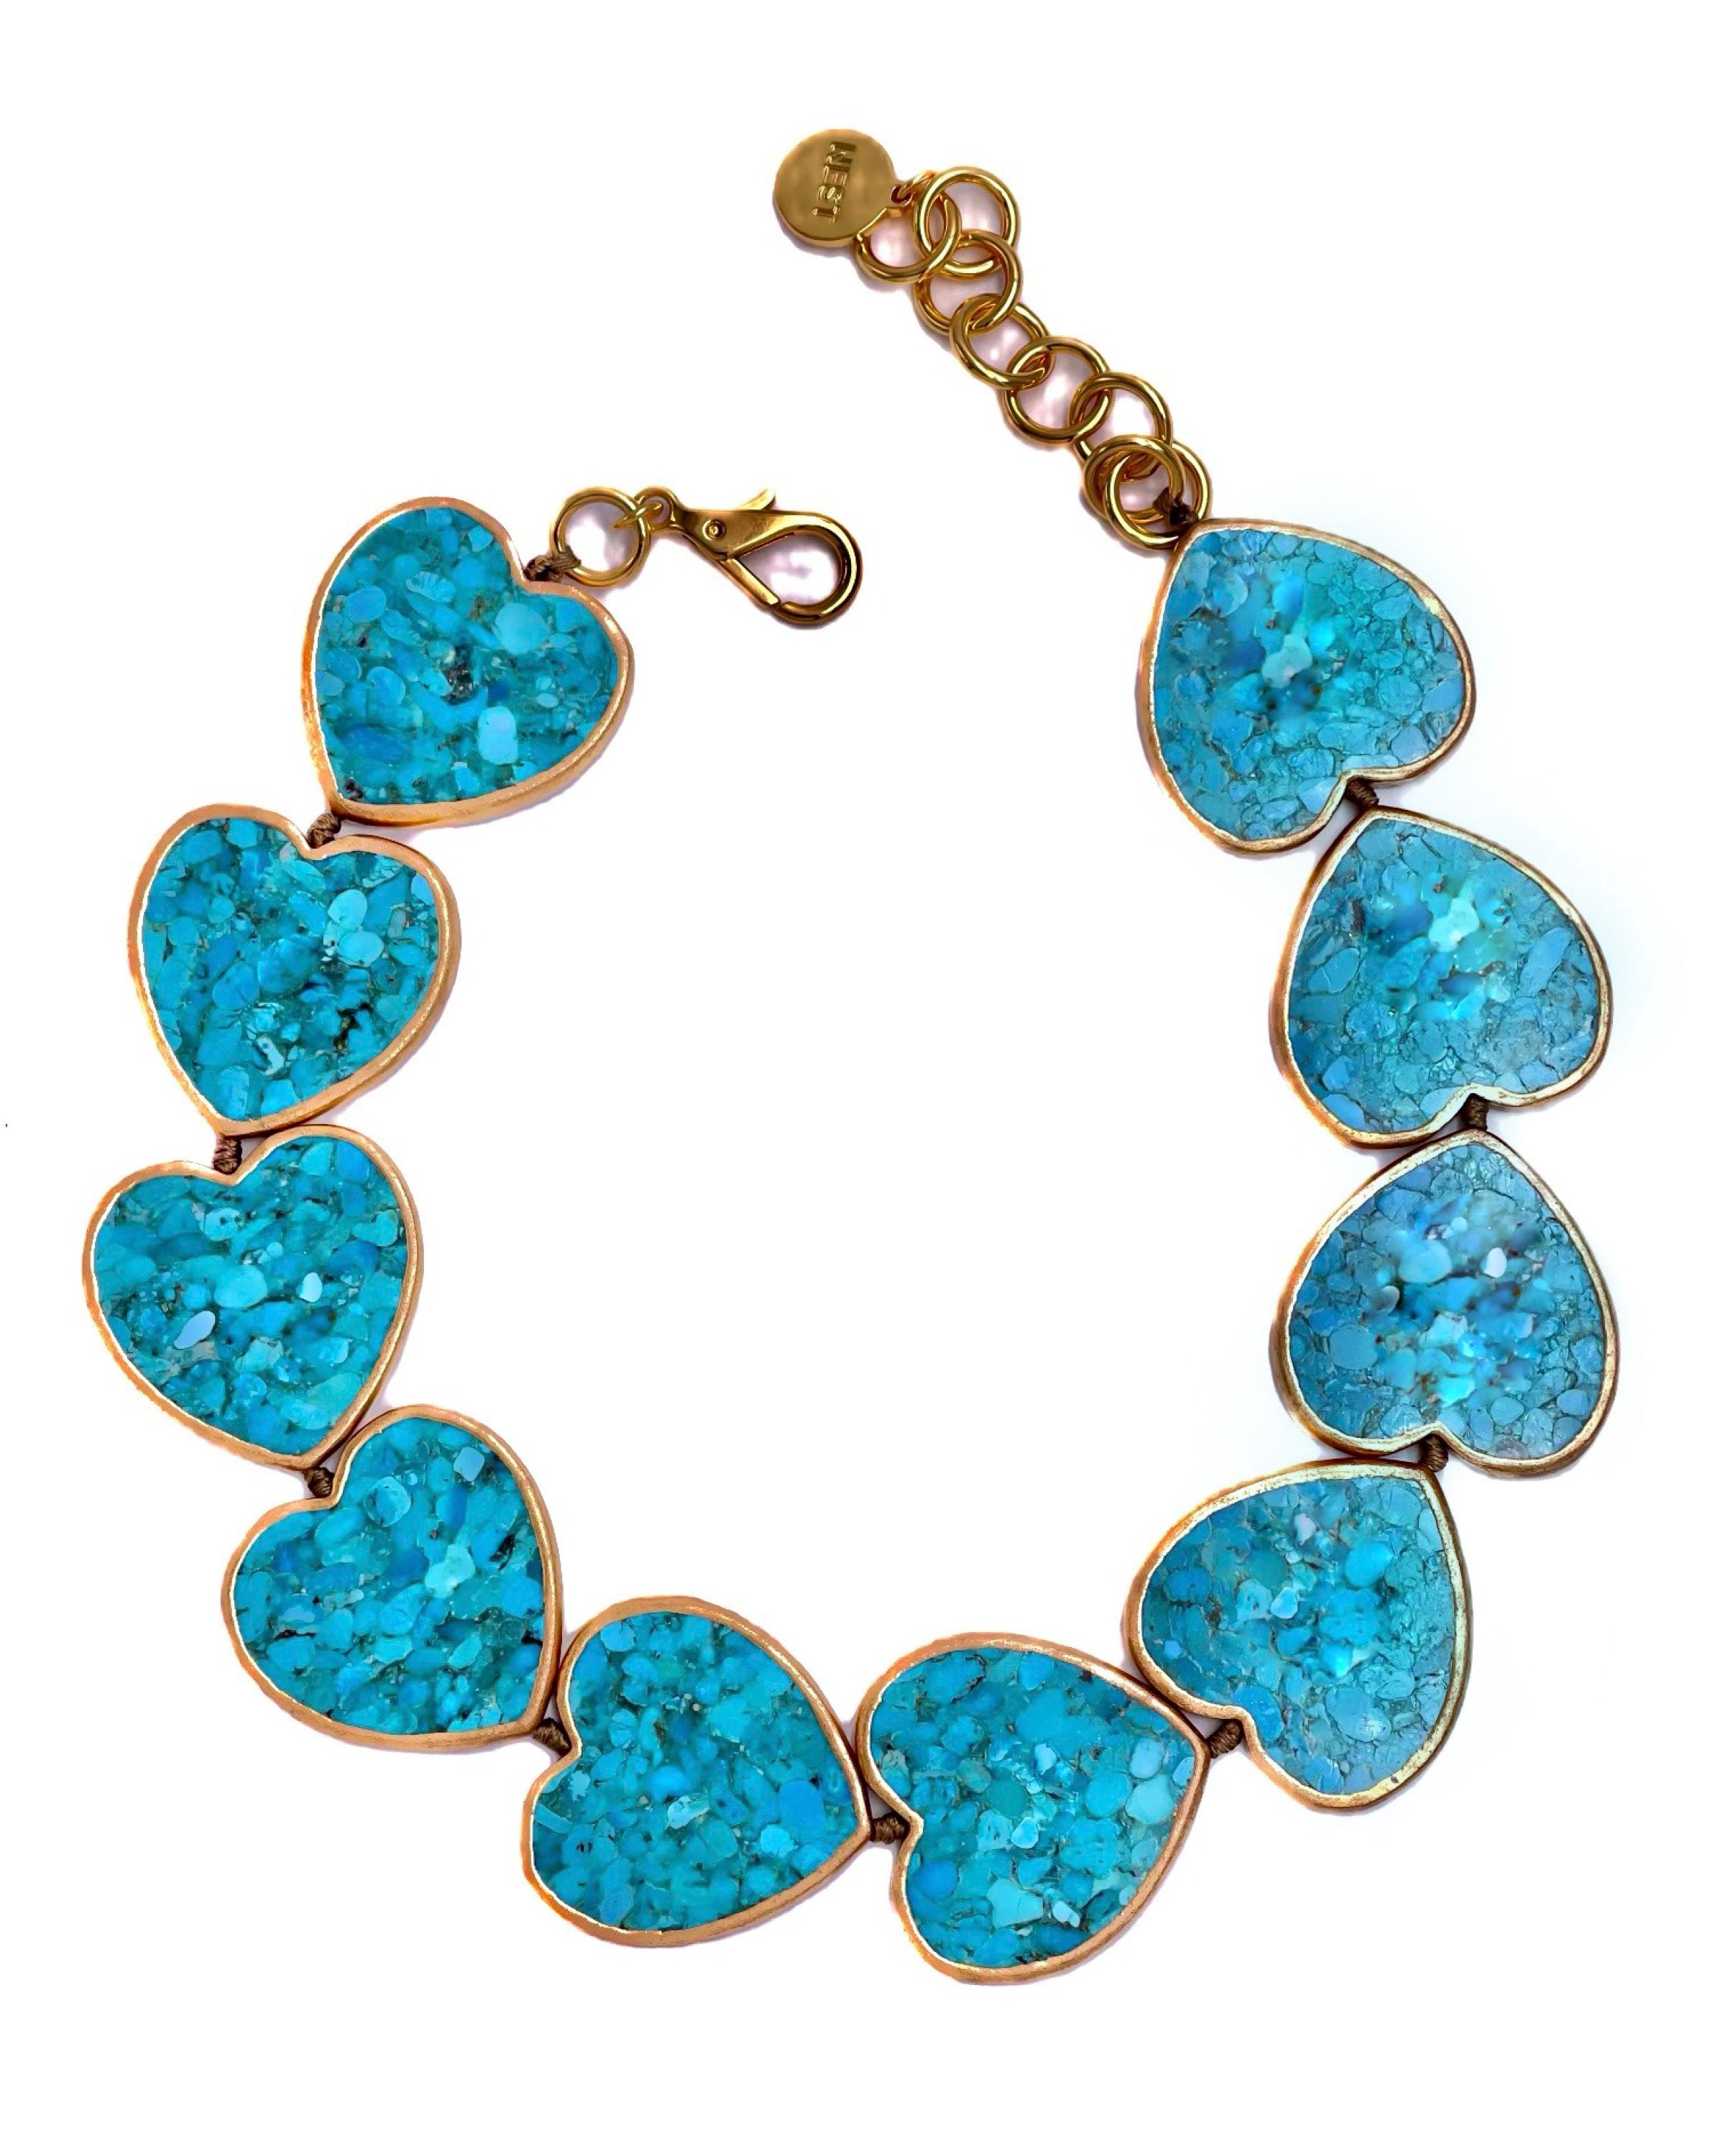 Turquoise Heart Statement Necklace